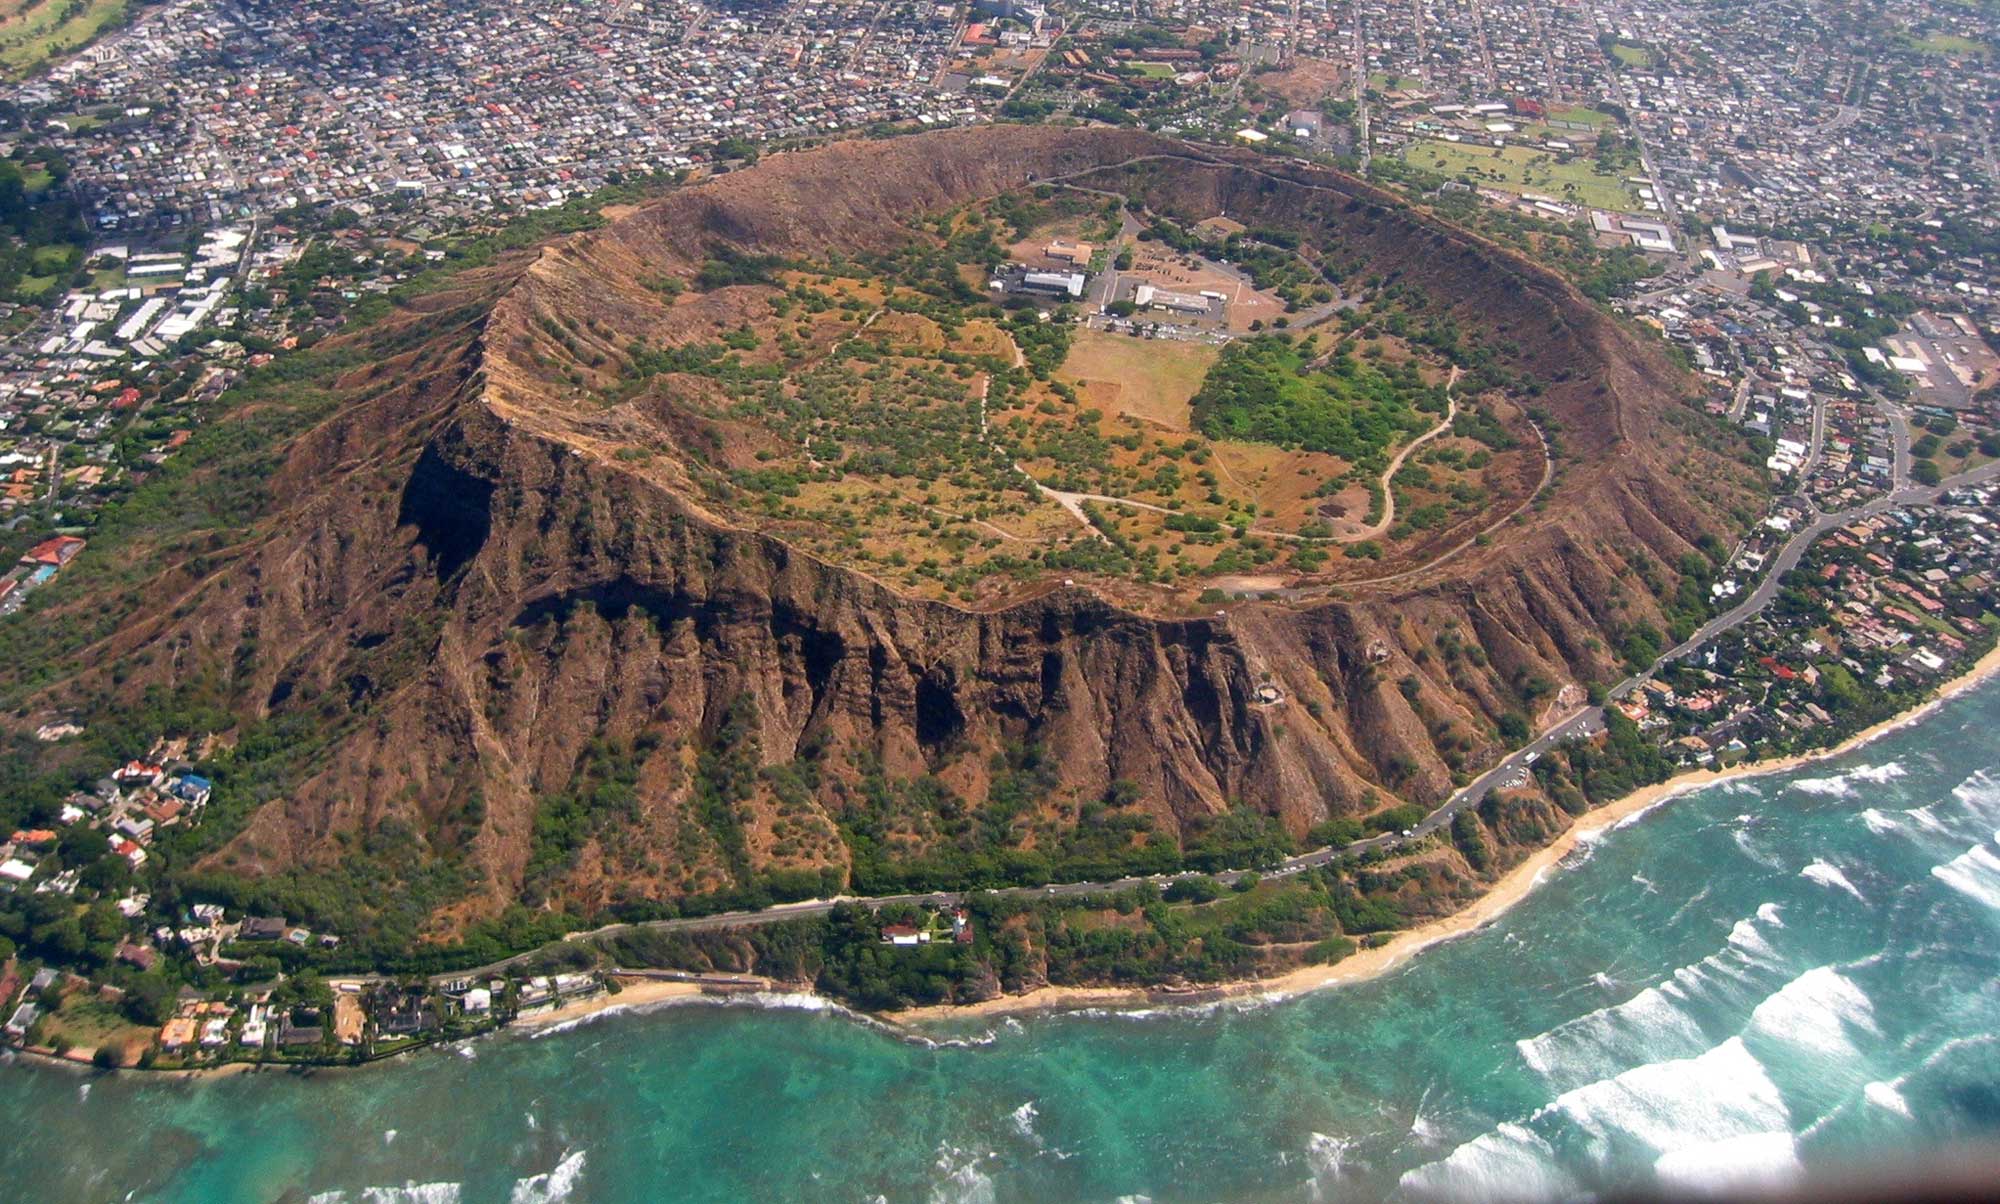 Photograph of Diamond Head, a large crater near the coast of Oahu. The photo shows a circular, raised crater with a narrow rim near the coast, with building of a city surrounding it on land. The bottom of the crater is flat inside with some green vegetation. A few buildings and parking lots are inside the far side of the crater.